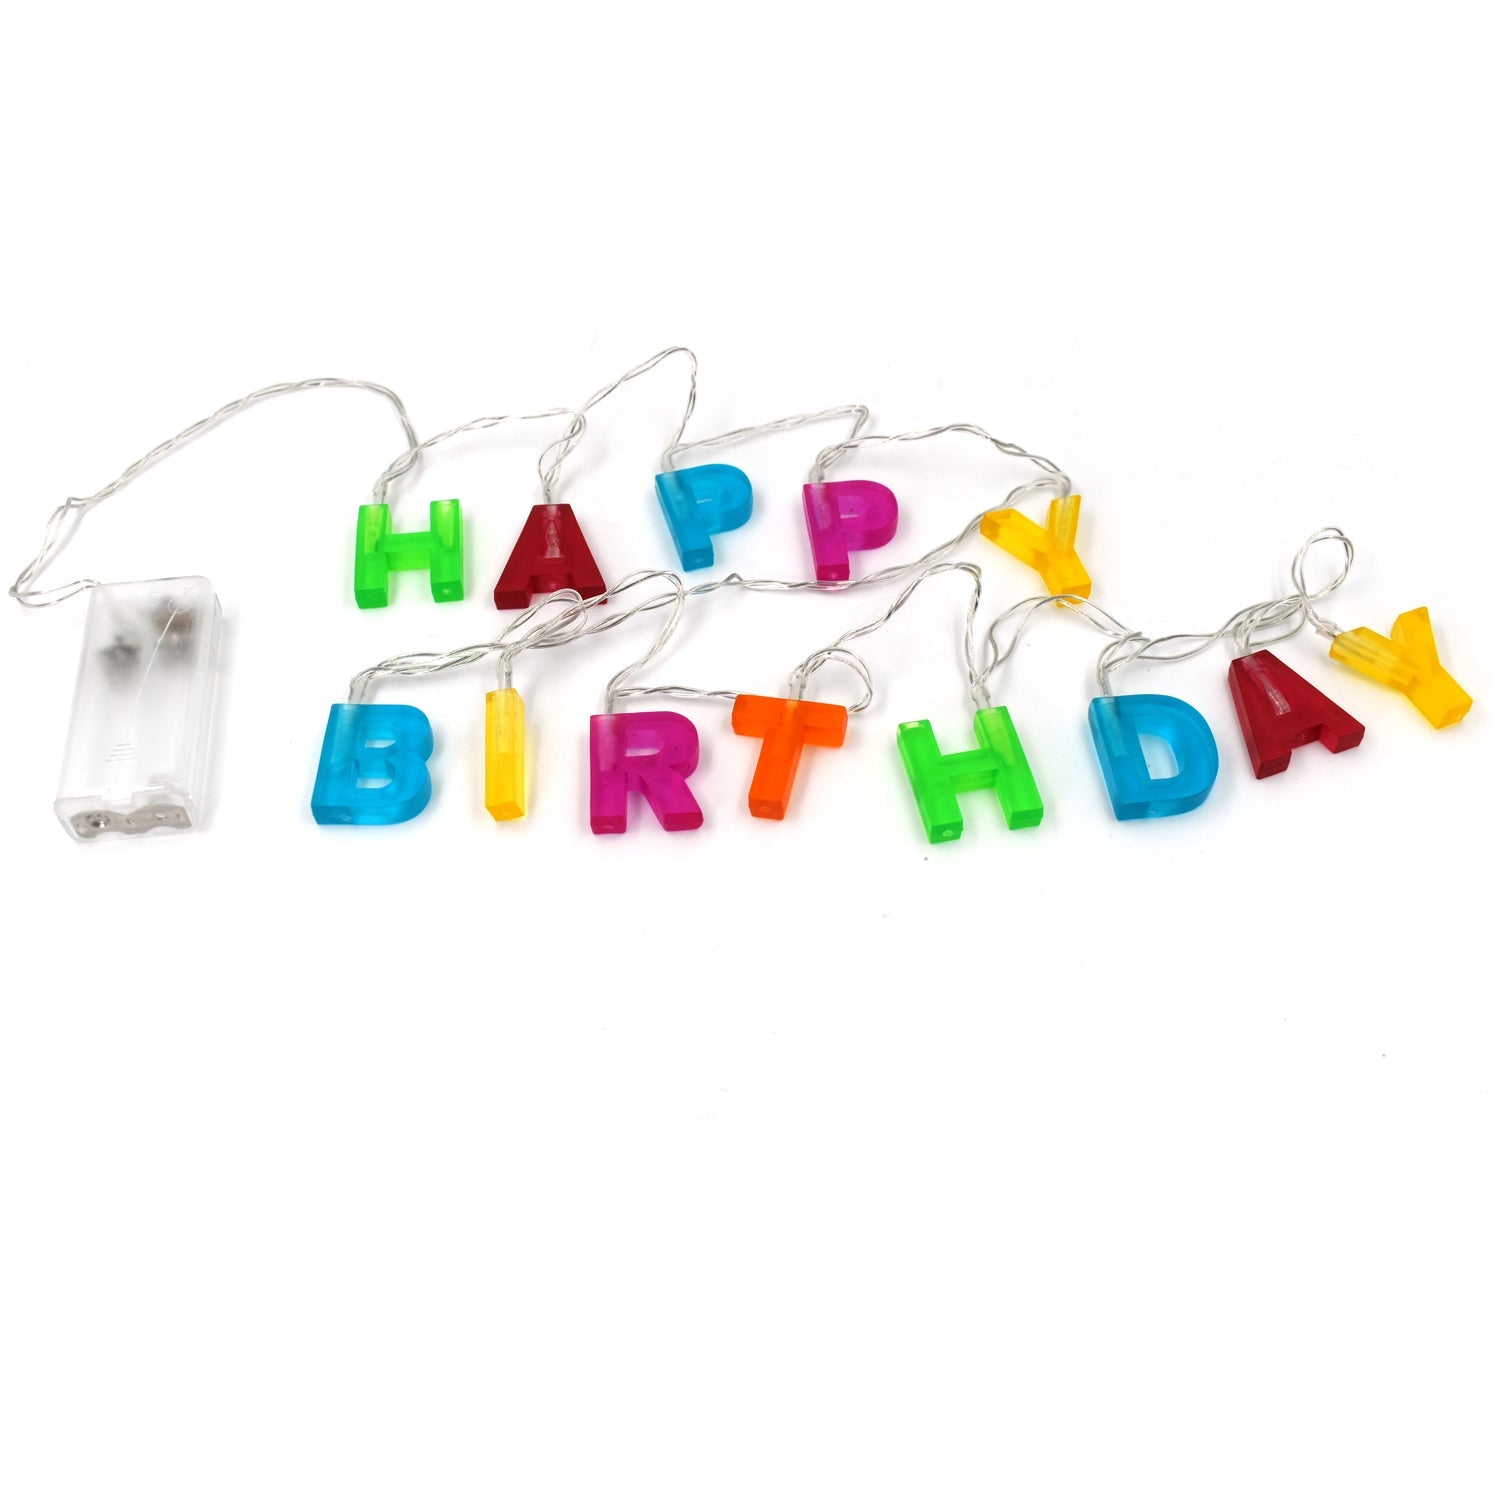 4815 Decoratives Plastic Happy Birthday 13 LED Letter Battery Operated String Lights, Outdoor String Lights (Multicolour) - DeoDap